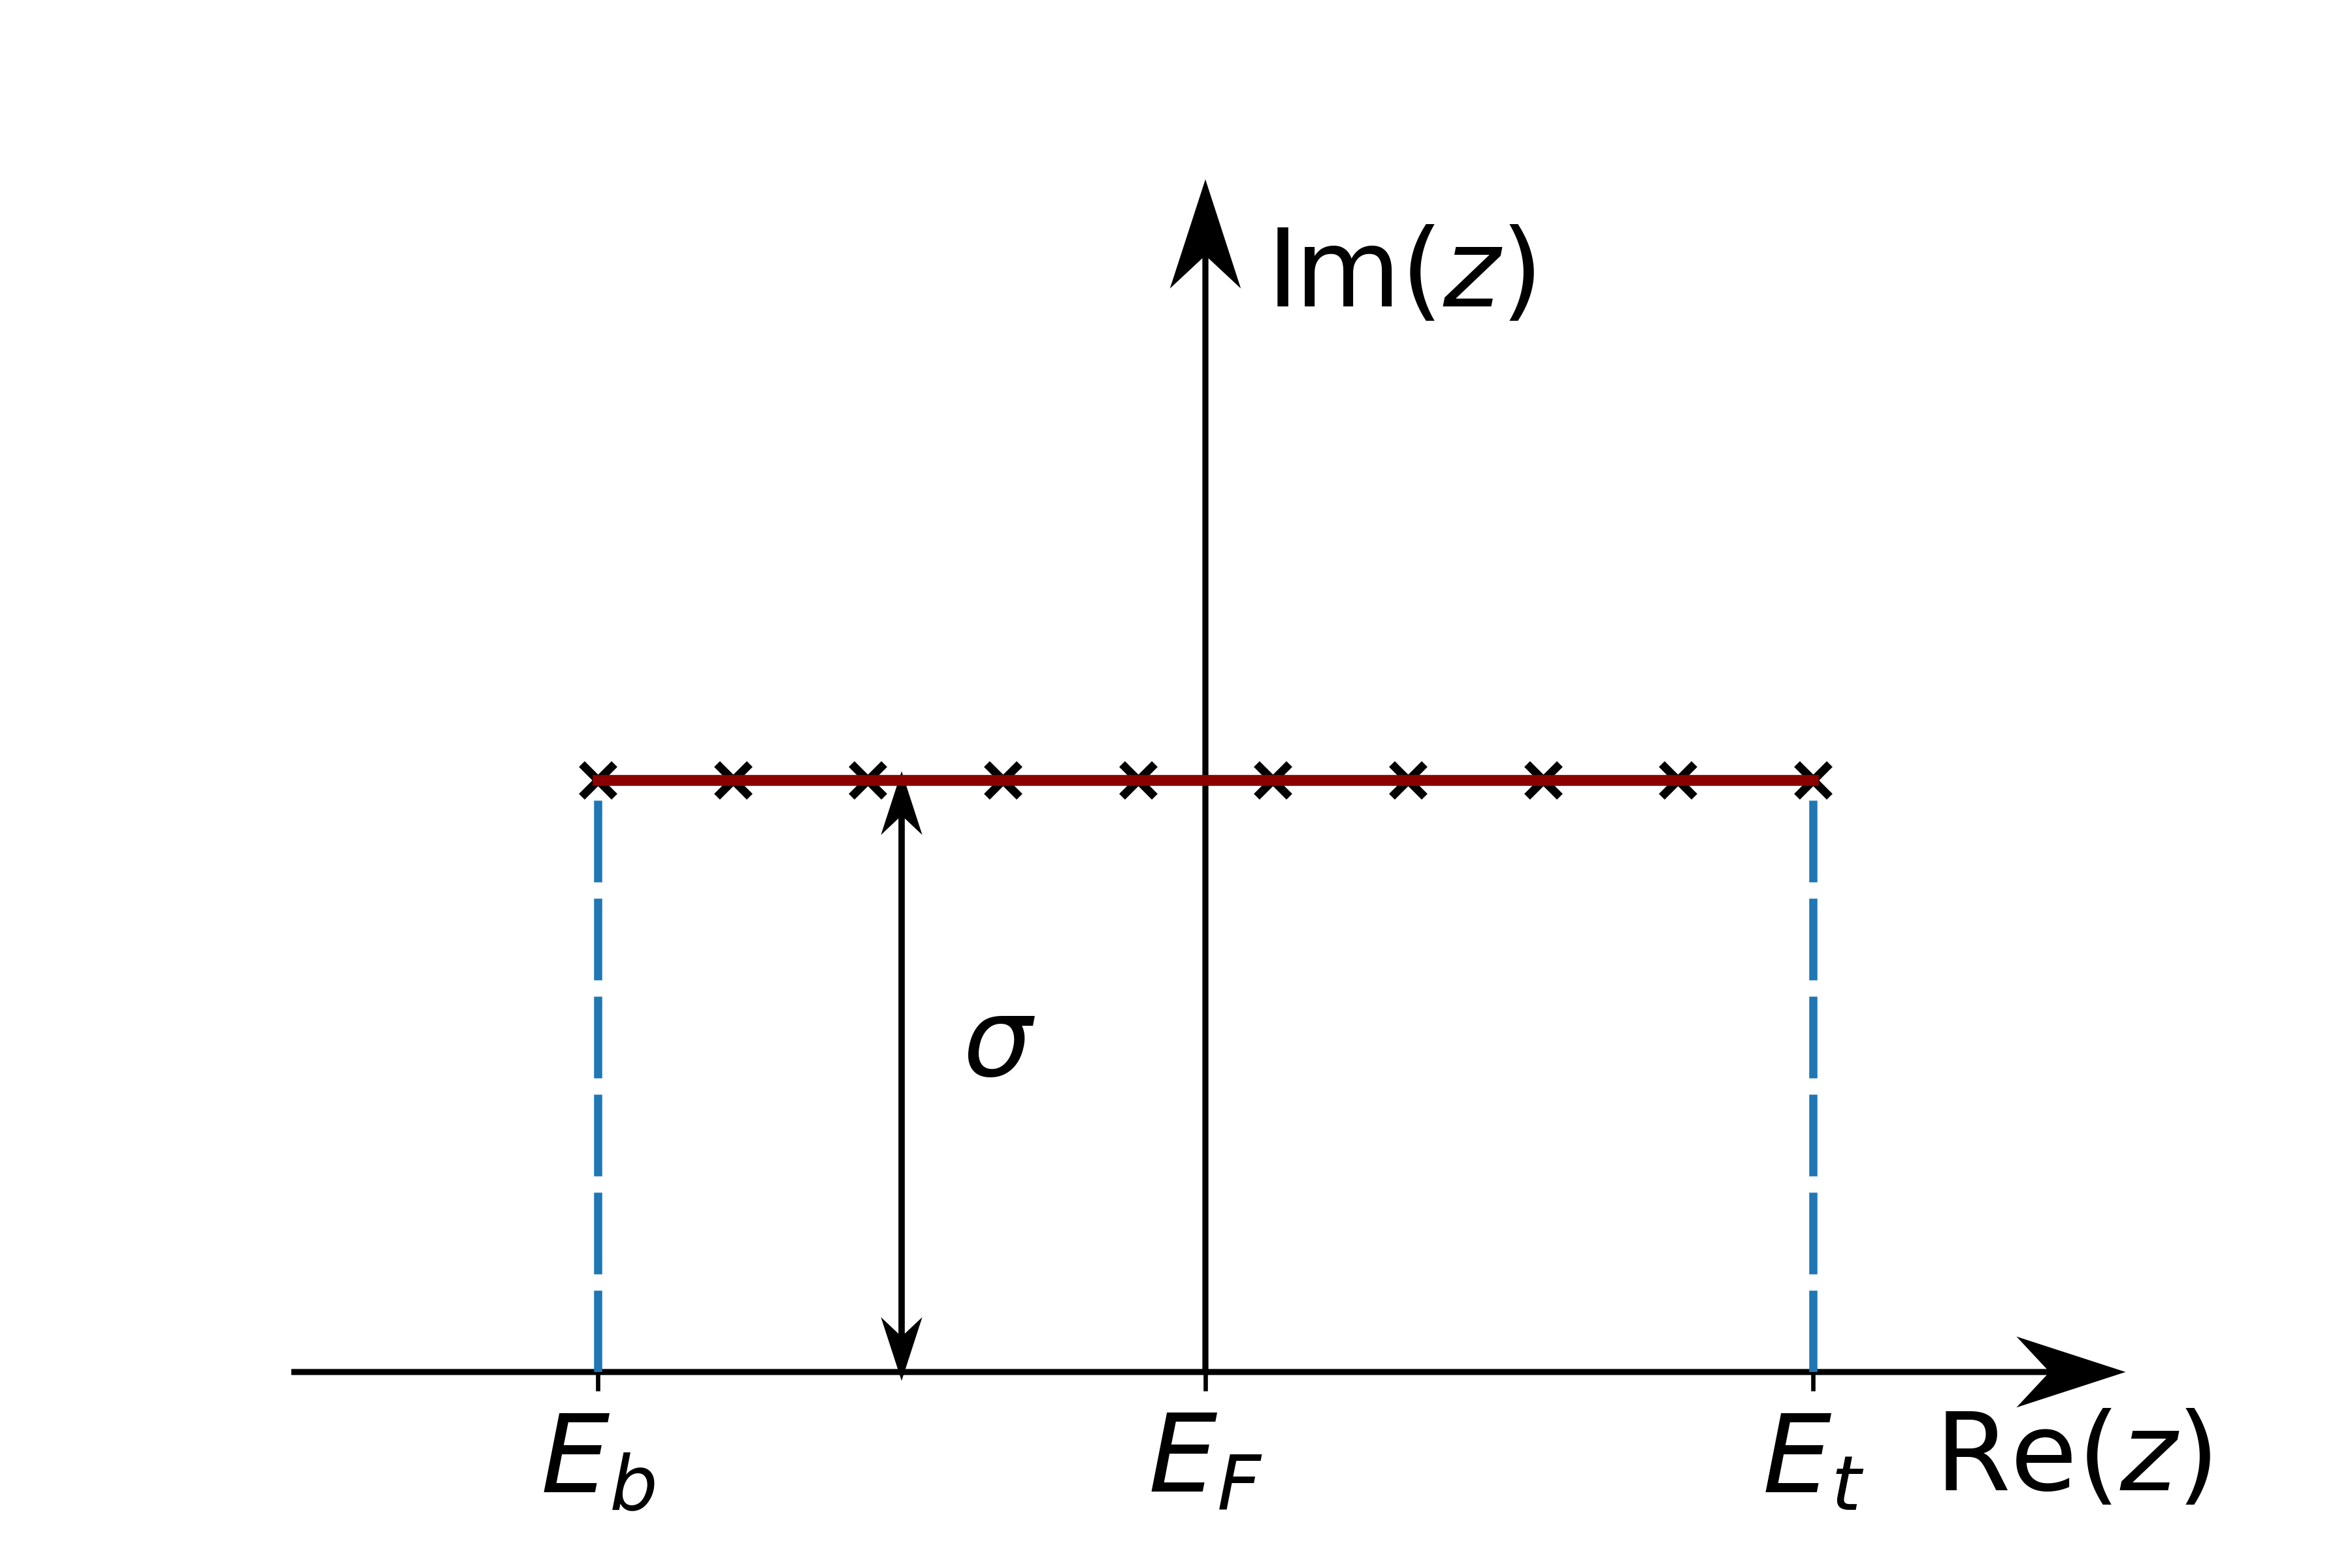 cap=Equidistant contour between eb and et. Lines at the edges symbolize the analytical continuation, which can be performed.,width=0.8\textwidth